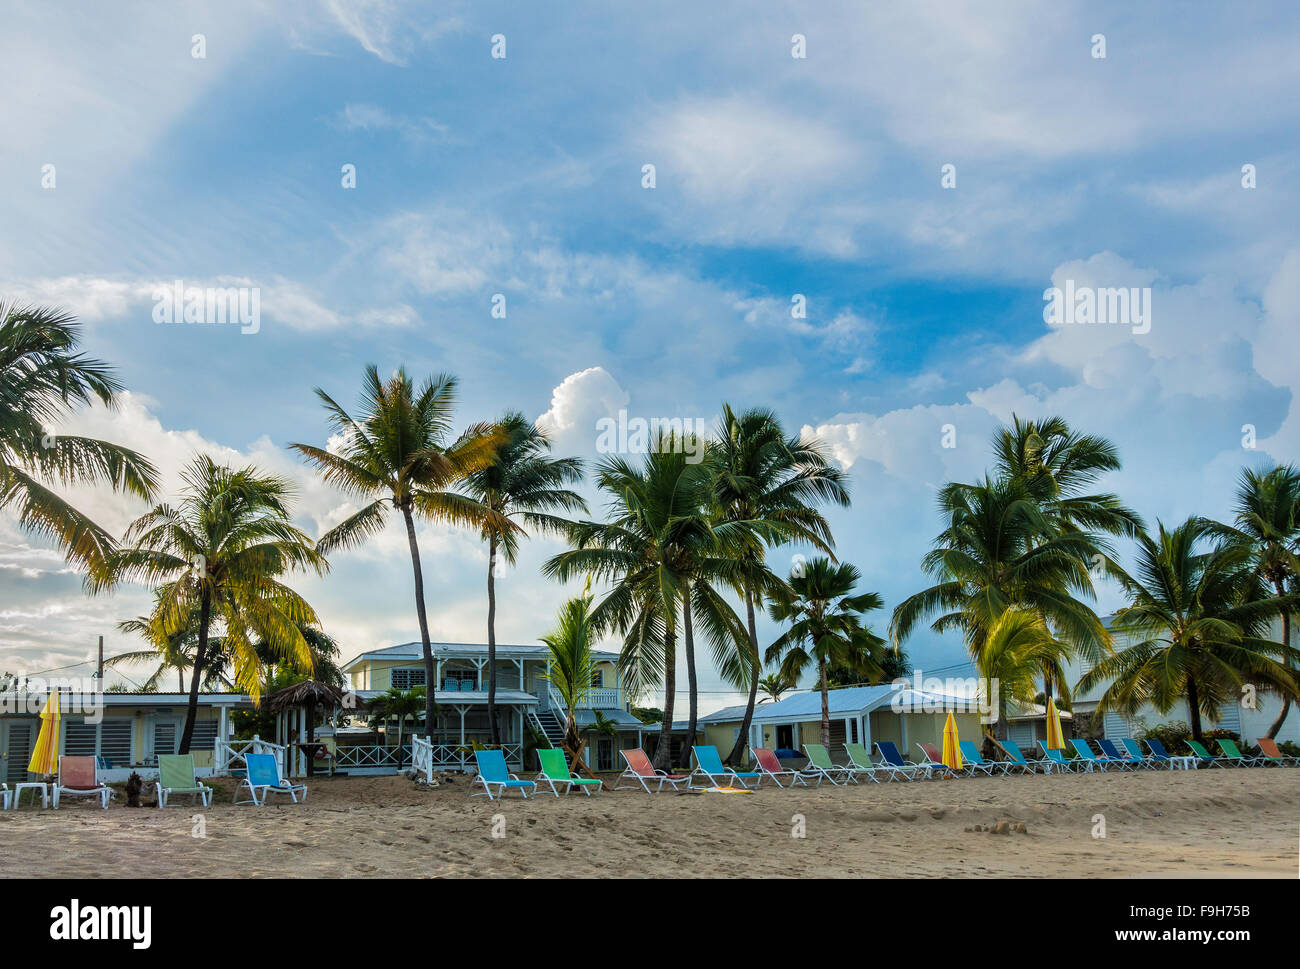 A view of a beachside resort, Cottages By The Sea, at sunrise, St. Croix, U.S. Virgin Islands. Stock Photo